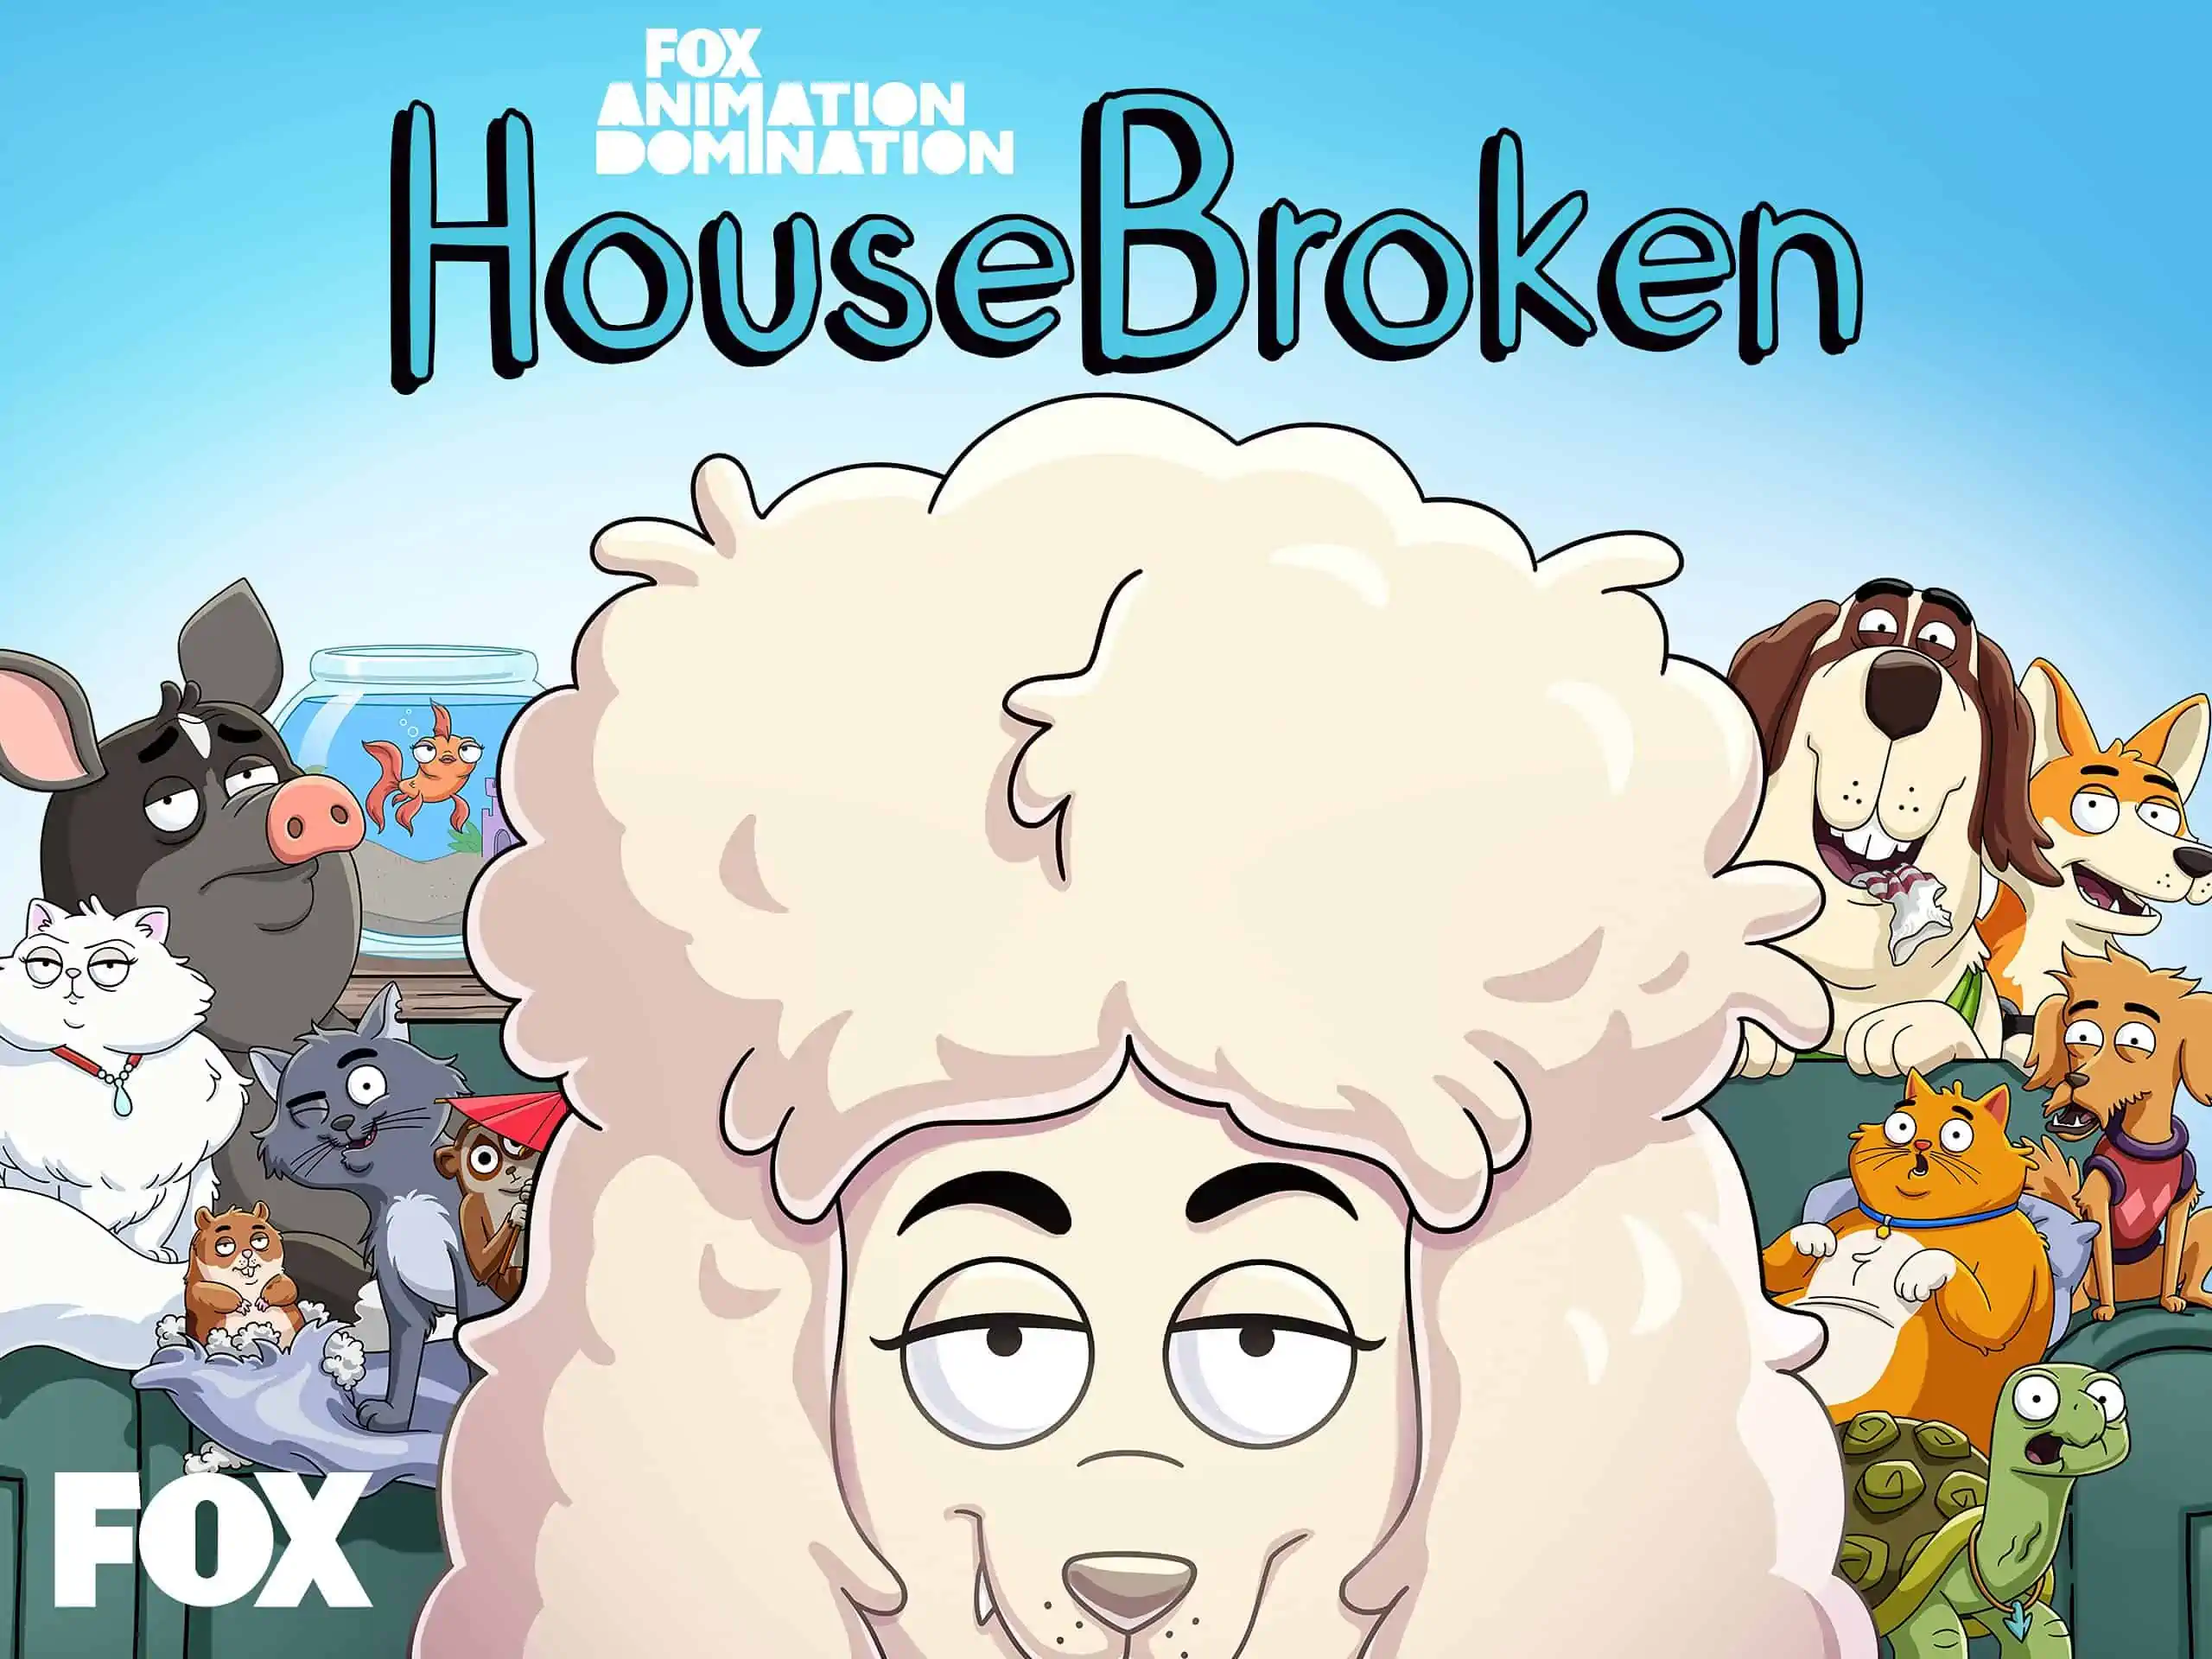 All About The Cast and Characters of “HouseBroken”